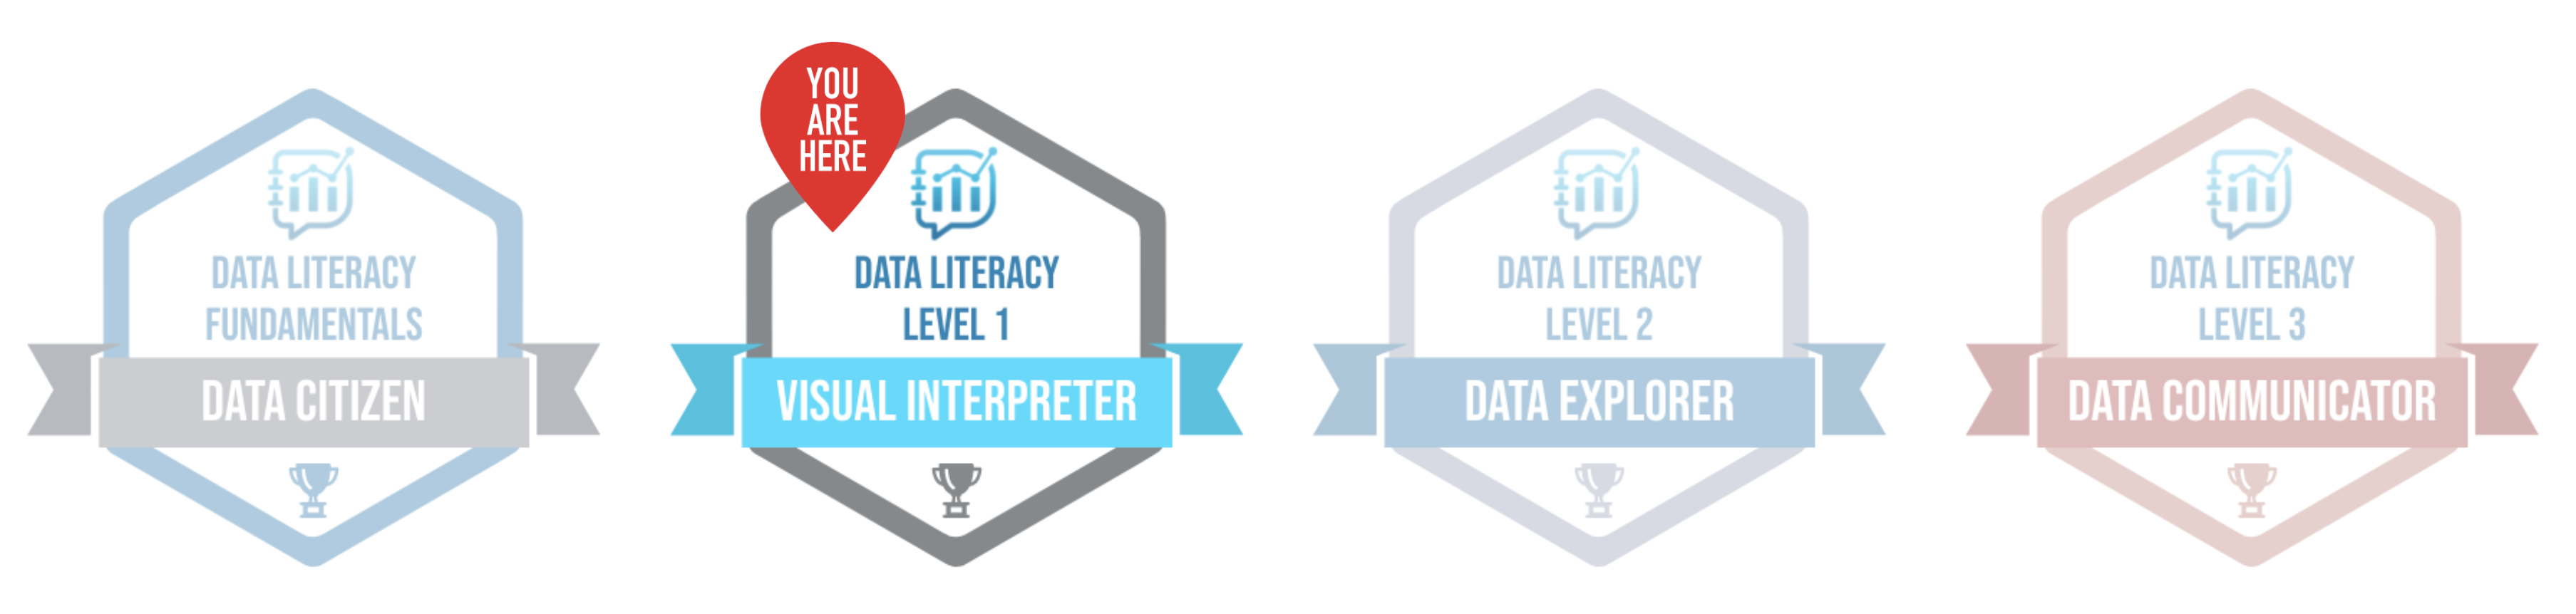 An image depicting the four levels in our core course offerings and their associated badges. From left to right there's the data citizen badge for Data Literacy Fundamentals, the visual interpreter badge for Data literacy Level 1, the data explorer badge for data literacy level 2, and the data communicator badge for data literacy level 3. There's a red icon labeled you are here on the visual interpreter badge. 